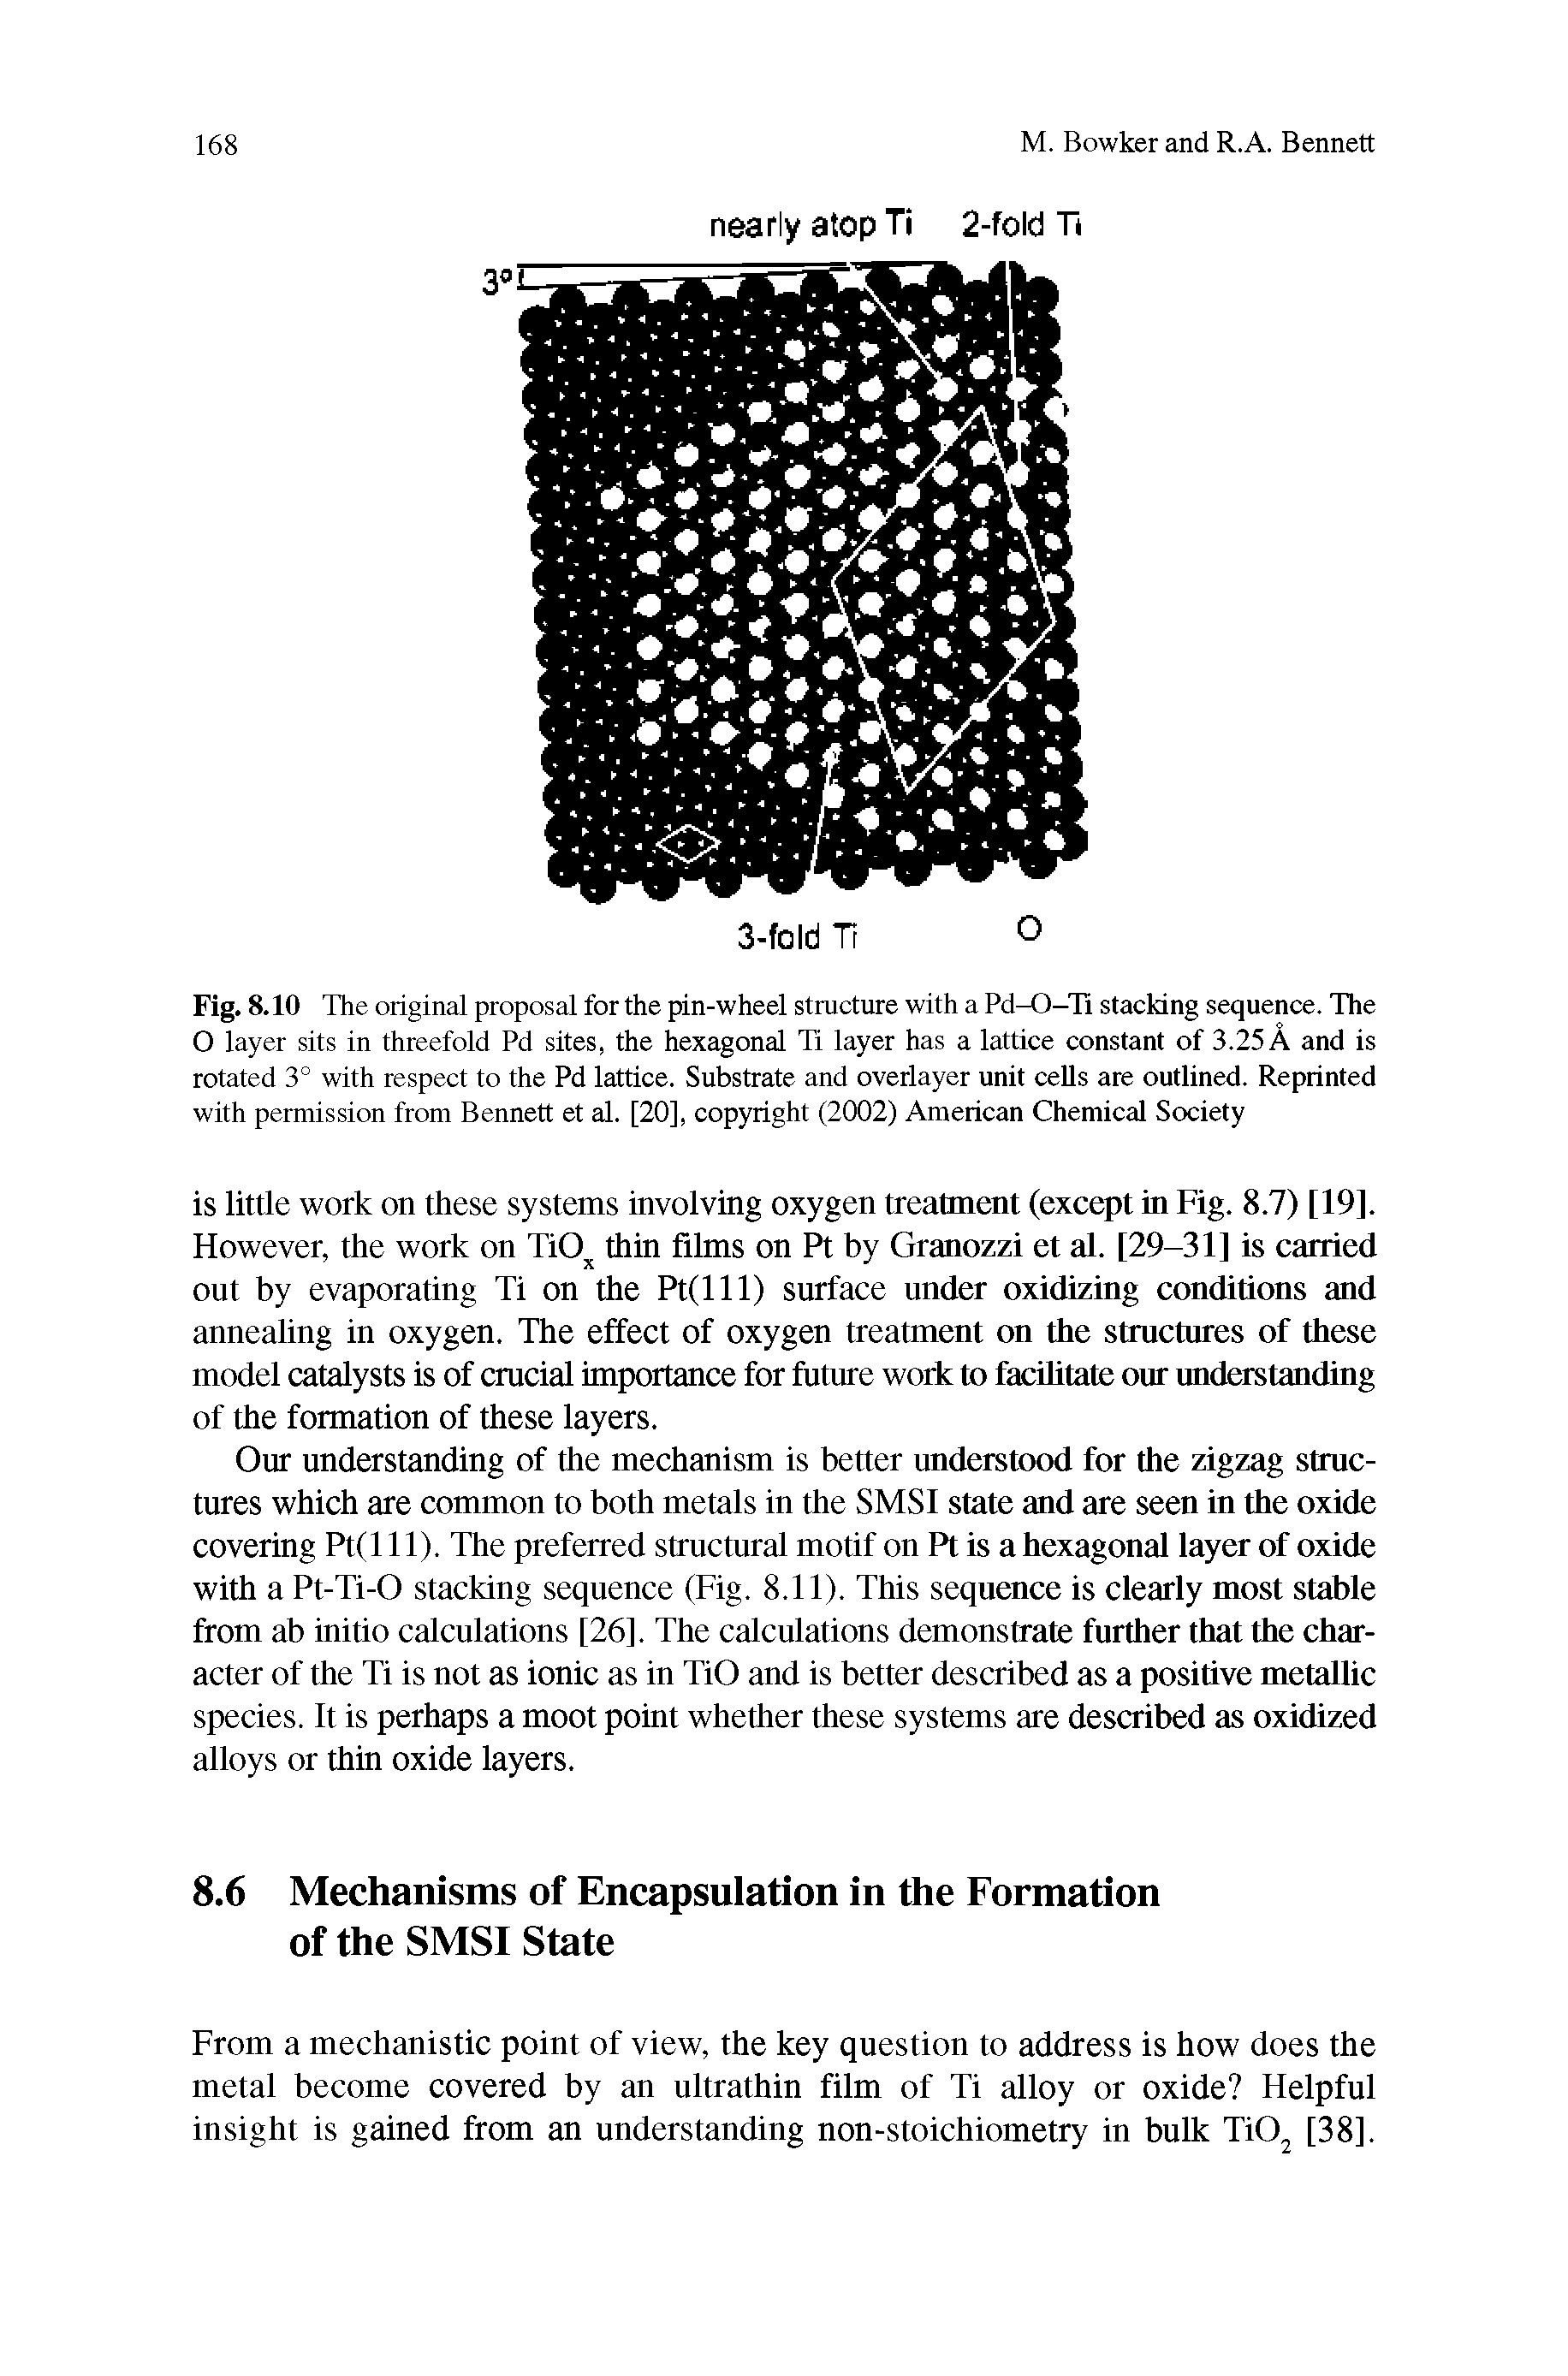 Fig. 8.10 The original proposal for the pin-wheel structure with a Pd-O-Ti stacking sequence. The O layer sits in threefold Pd sites, the hexagonal Ti layer has a lattice constant of 3.25 A and is rotated 3° with respect to the Pd lattice. Substrate and overlayer unit cells are outlined. Reprinted with permission from Bennett et al. [20], copyright (2002) American Chemical Society...